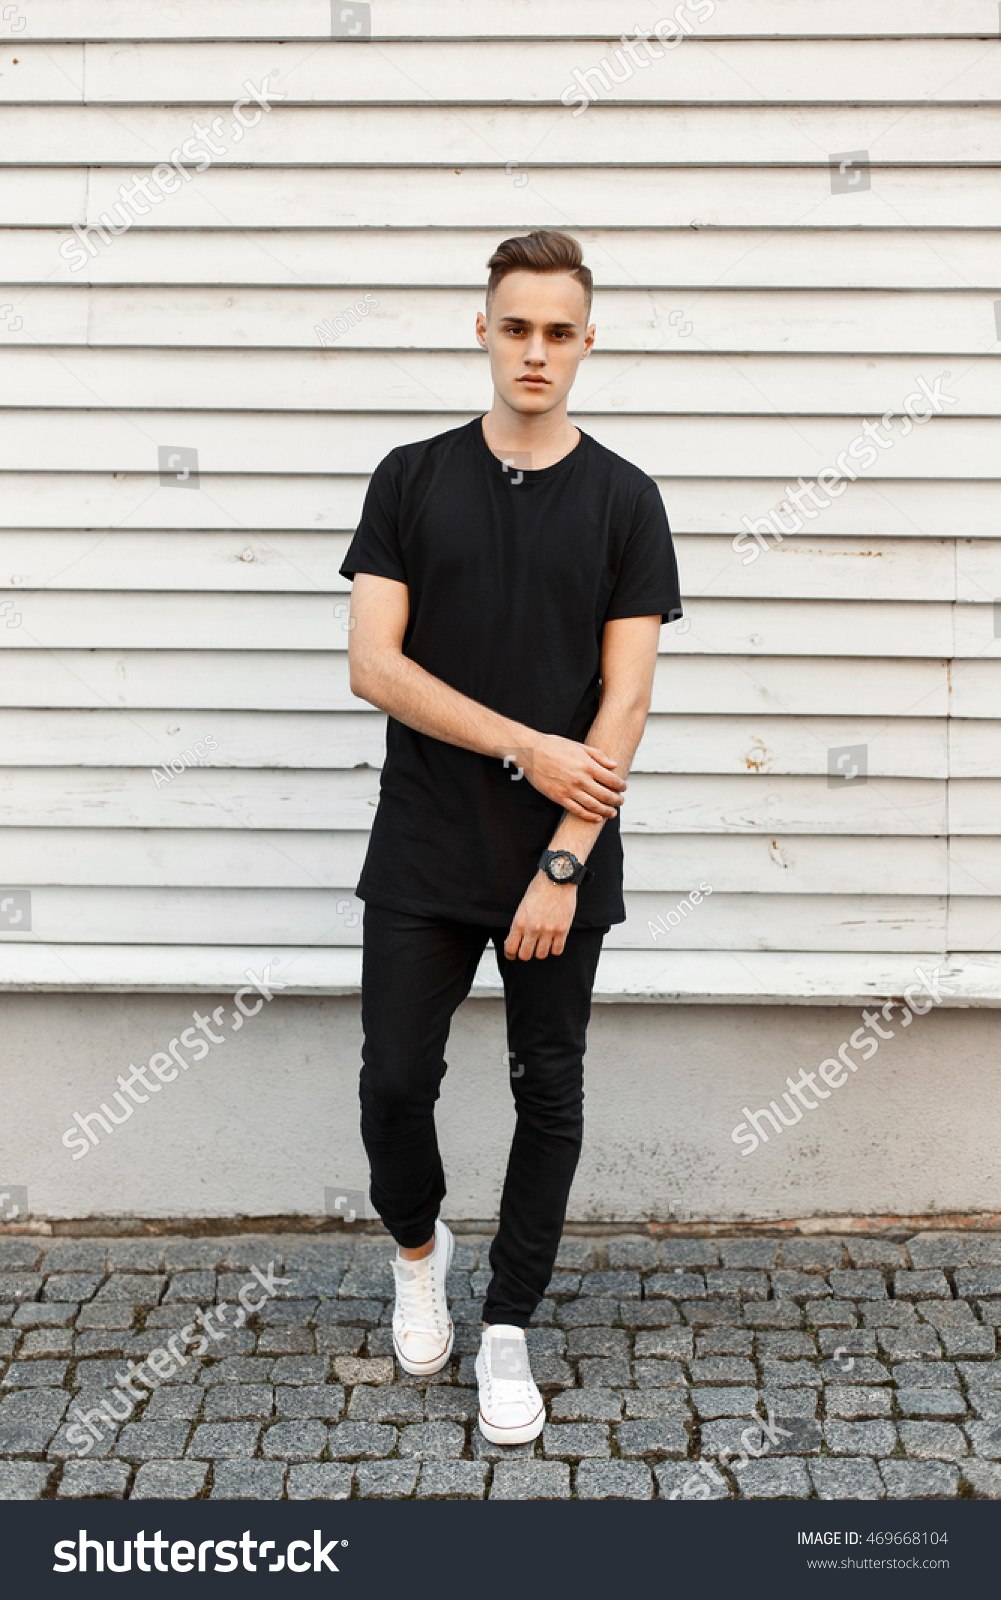 all black with white sneakers